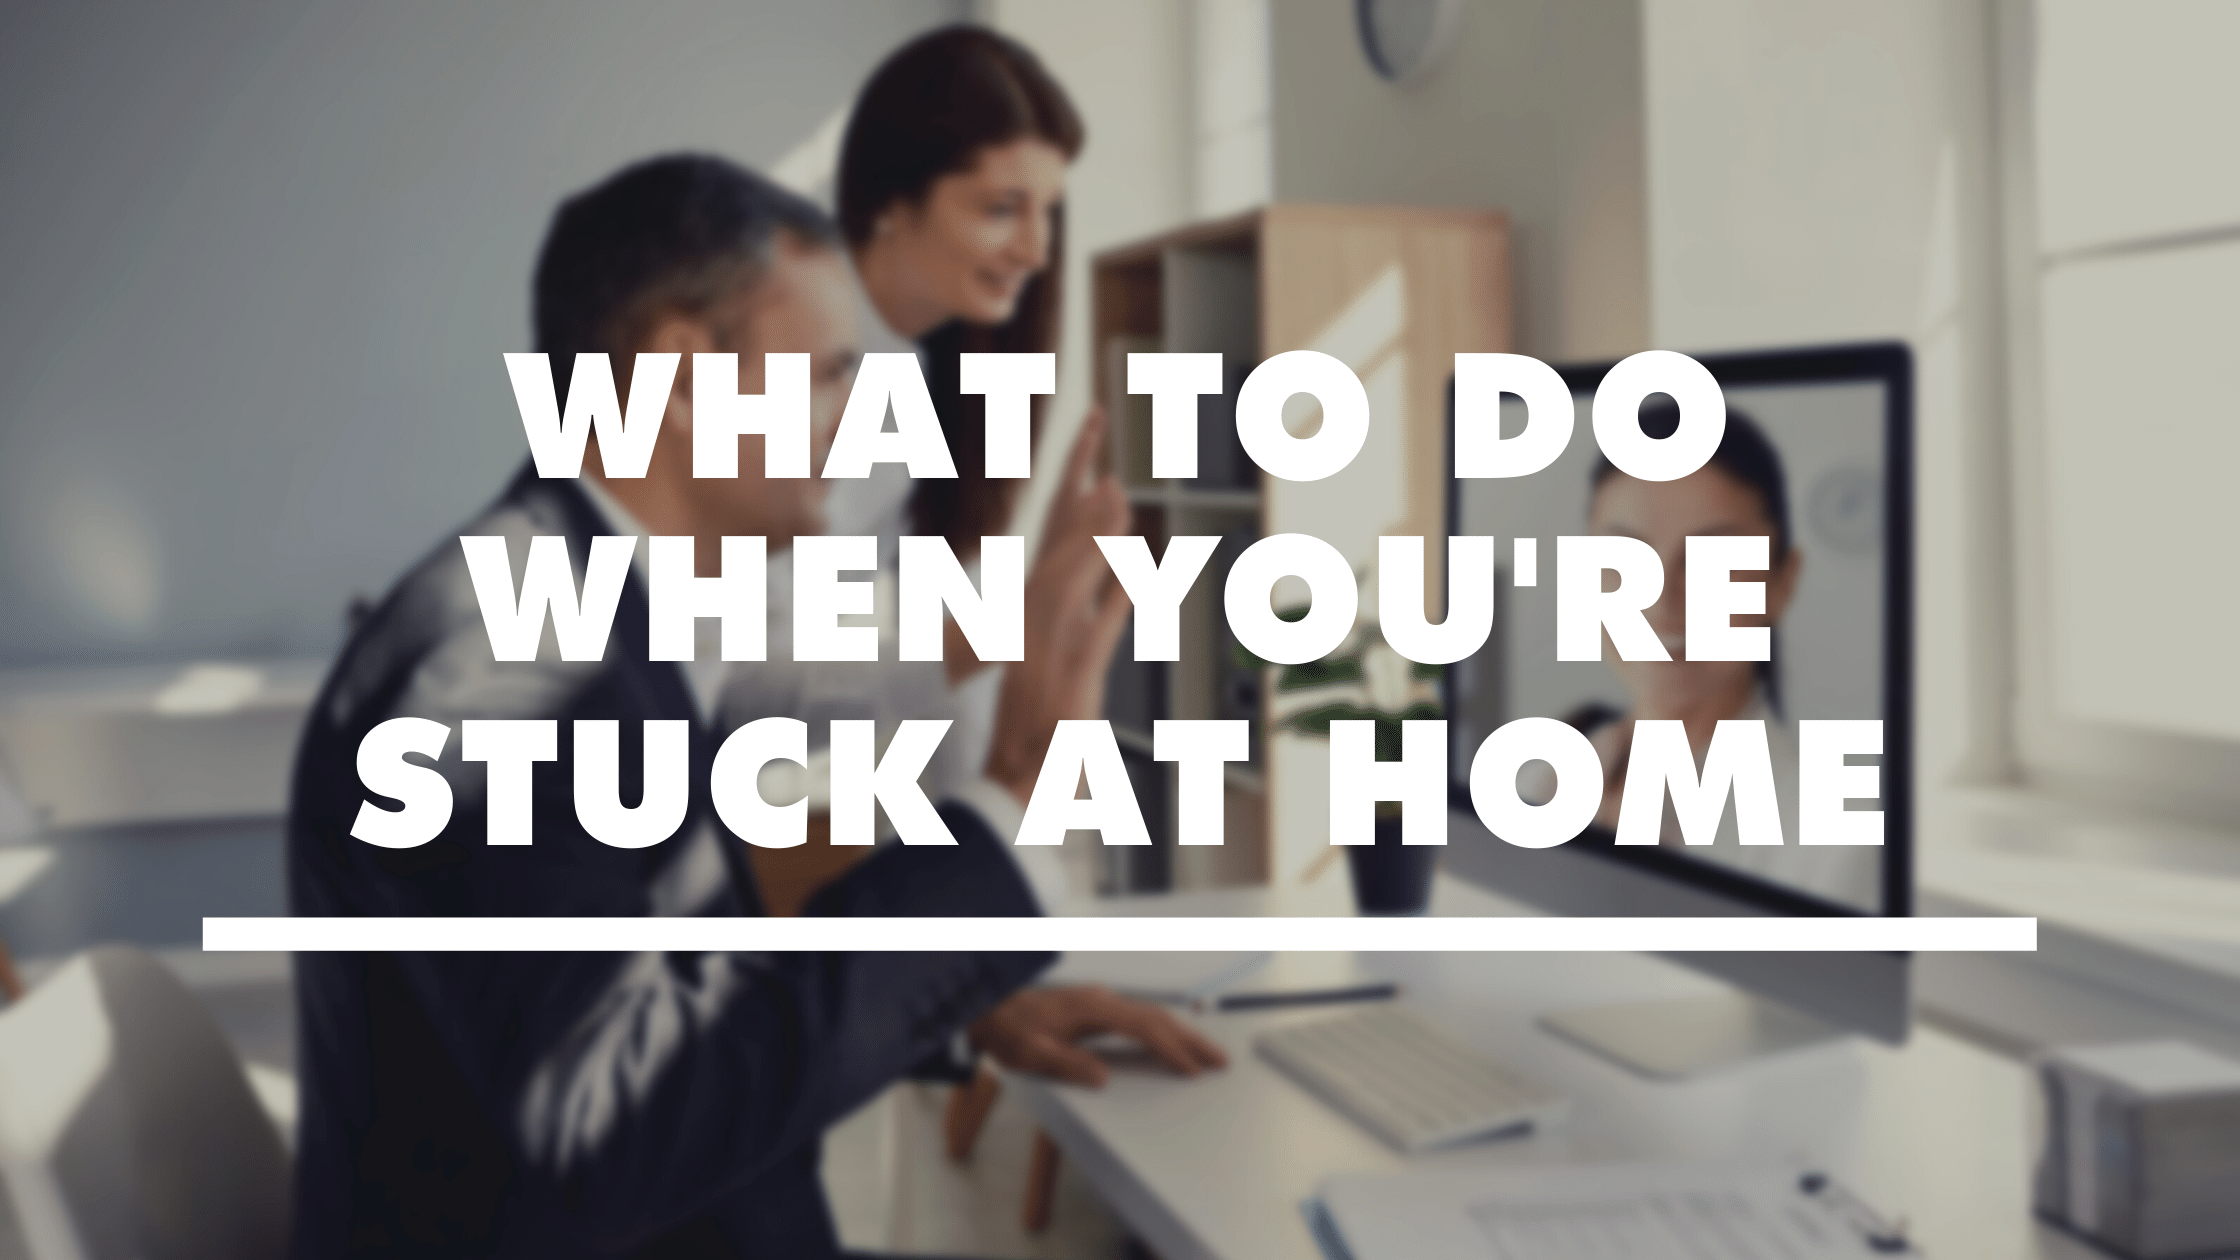 What To Do When You're Stuck At Home